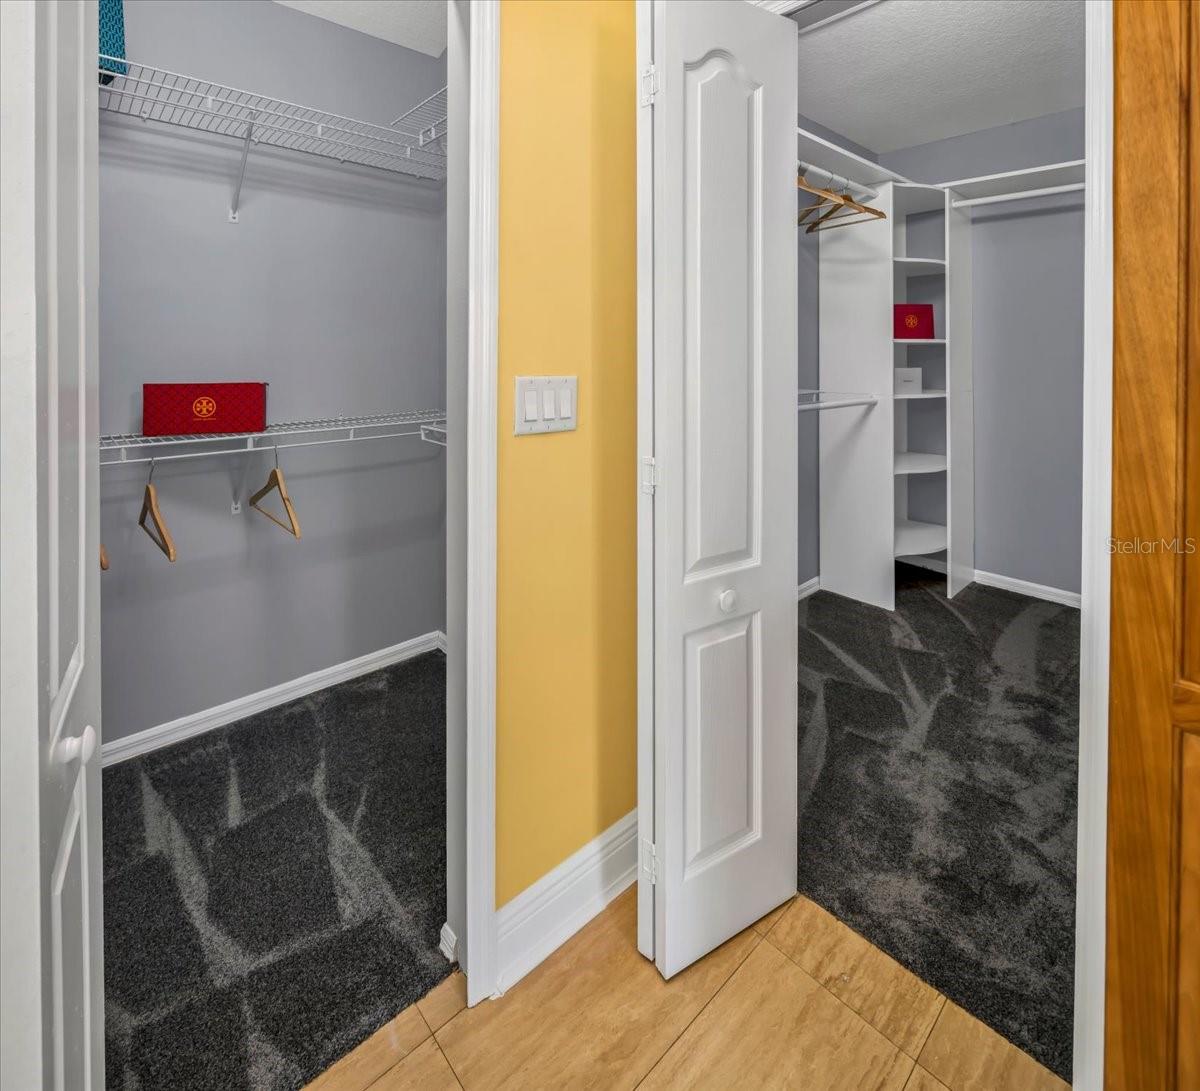 His and hers walk-in closets